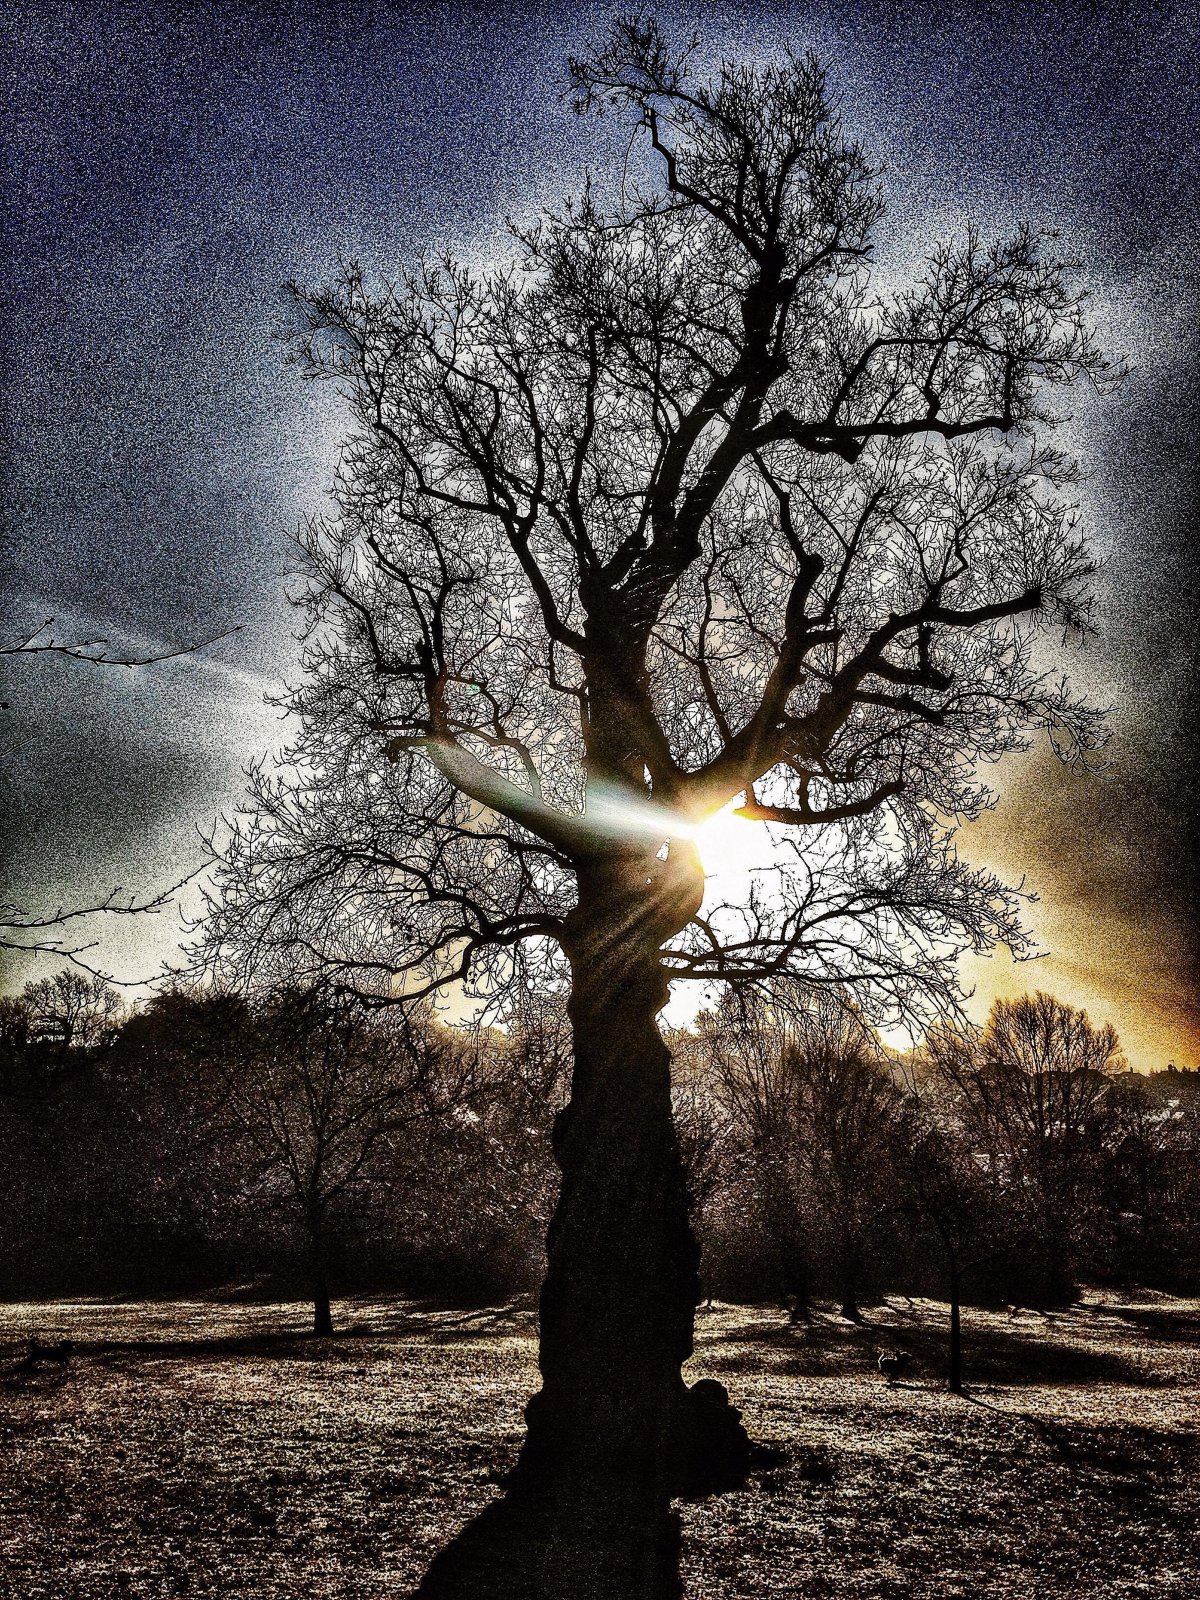 Evening tree silhouette scenery picture